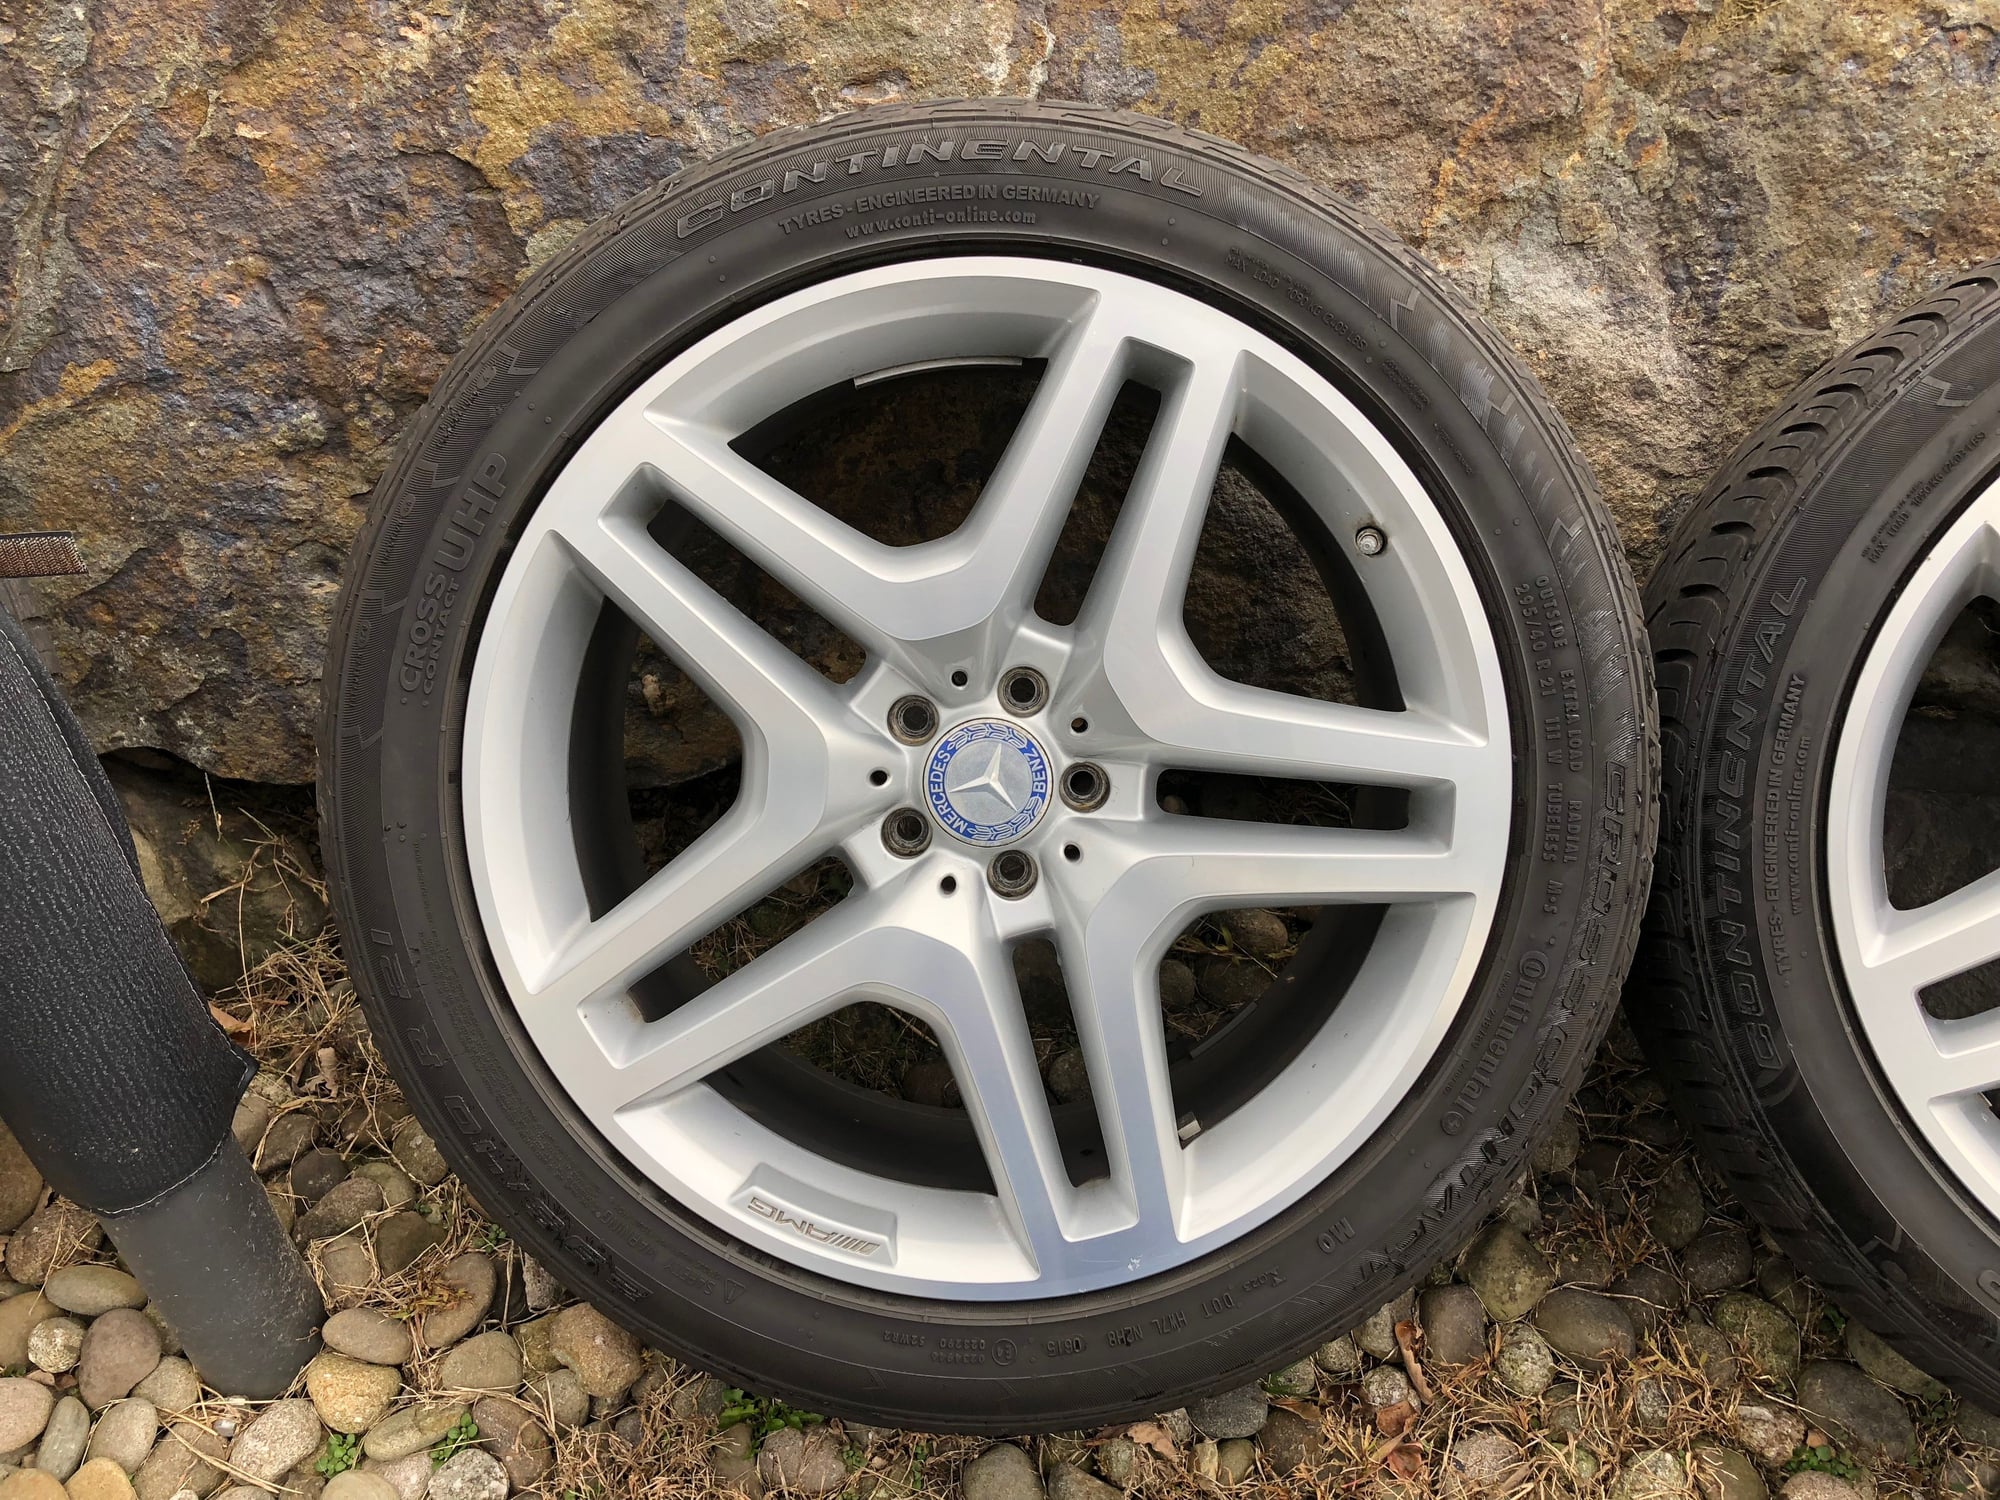 Wheels and Tires/Axles - 21 AMG Wheel Set from my GL OEM with Continental Tires - Used - 2013 to 2019 Mercedes-Benz GL550 - 2013 to 2019 Mercedes-Benz GL63 AMG - Highland Mills, NY 10930, United States